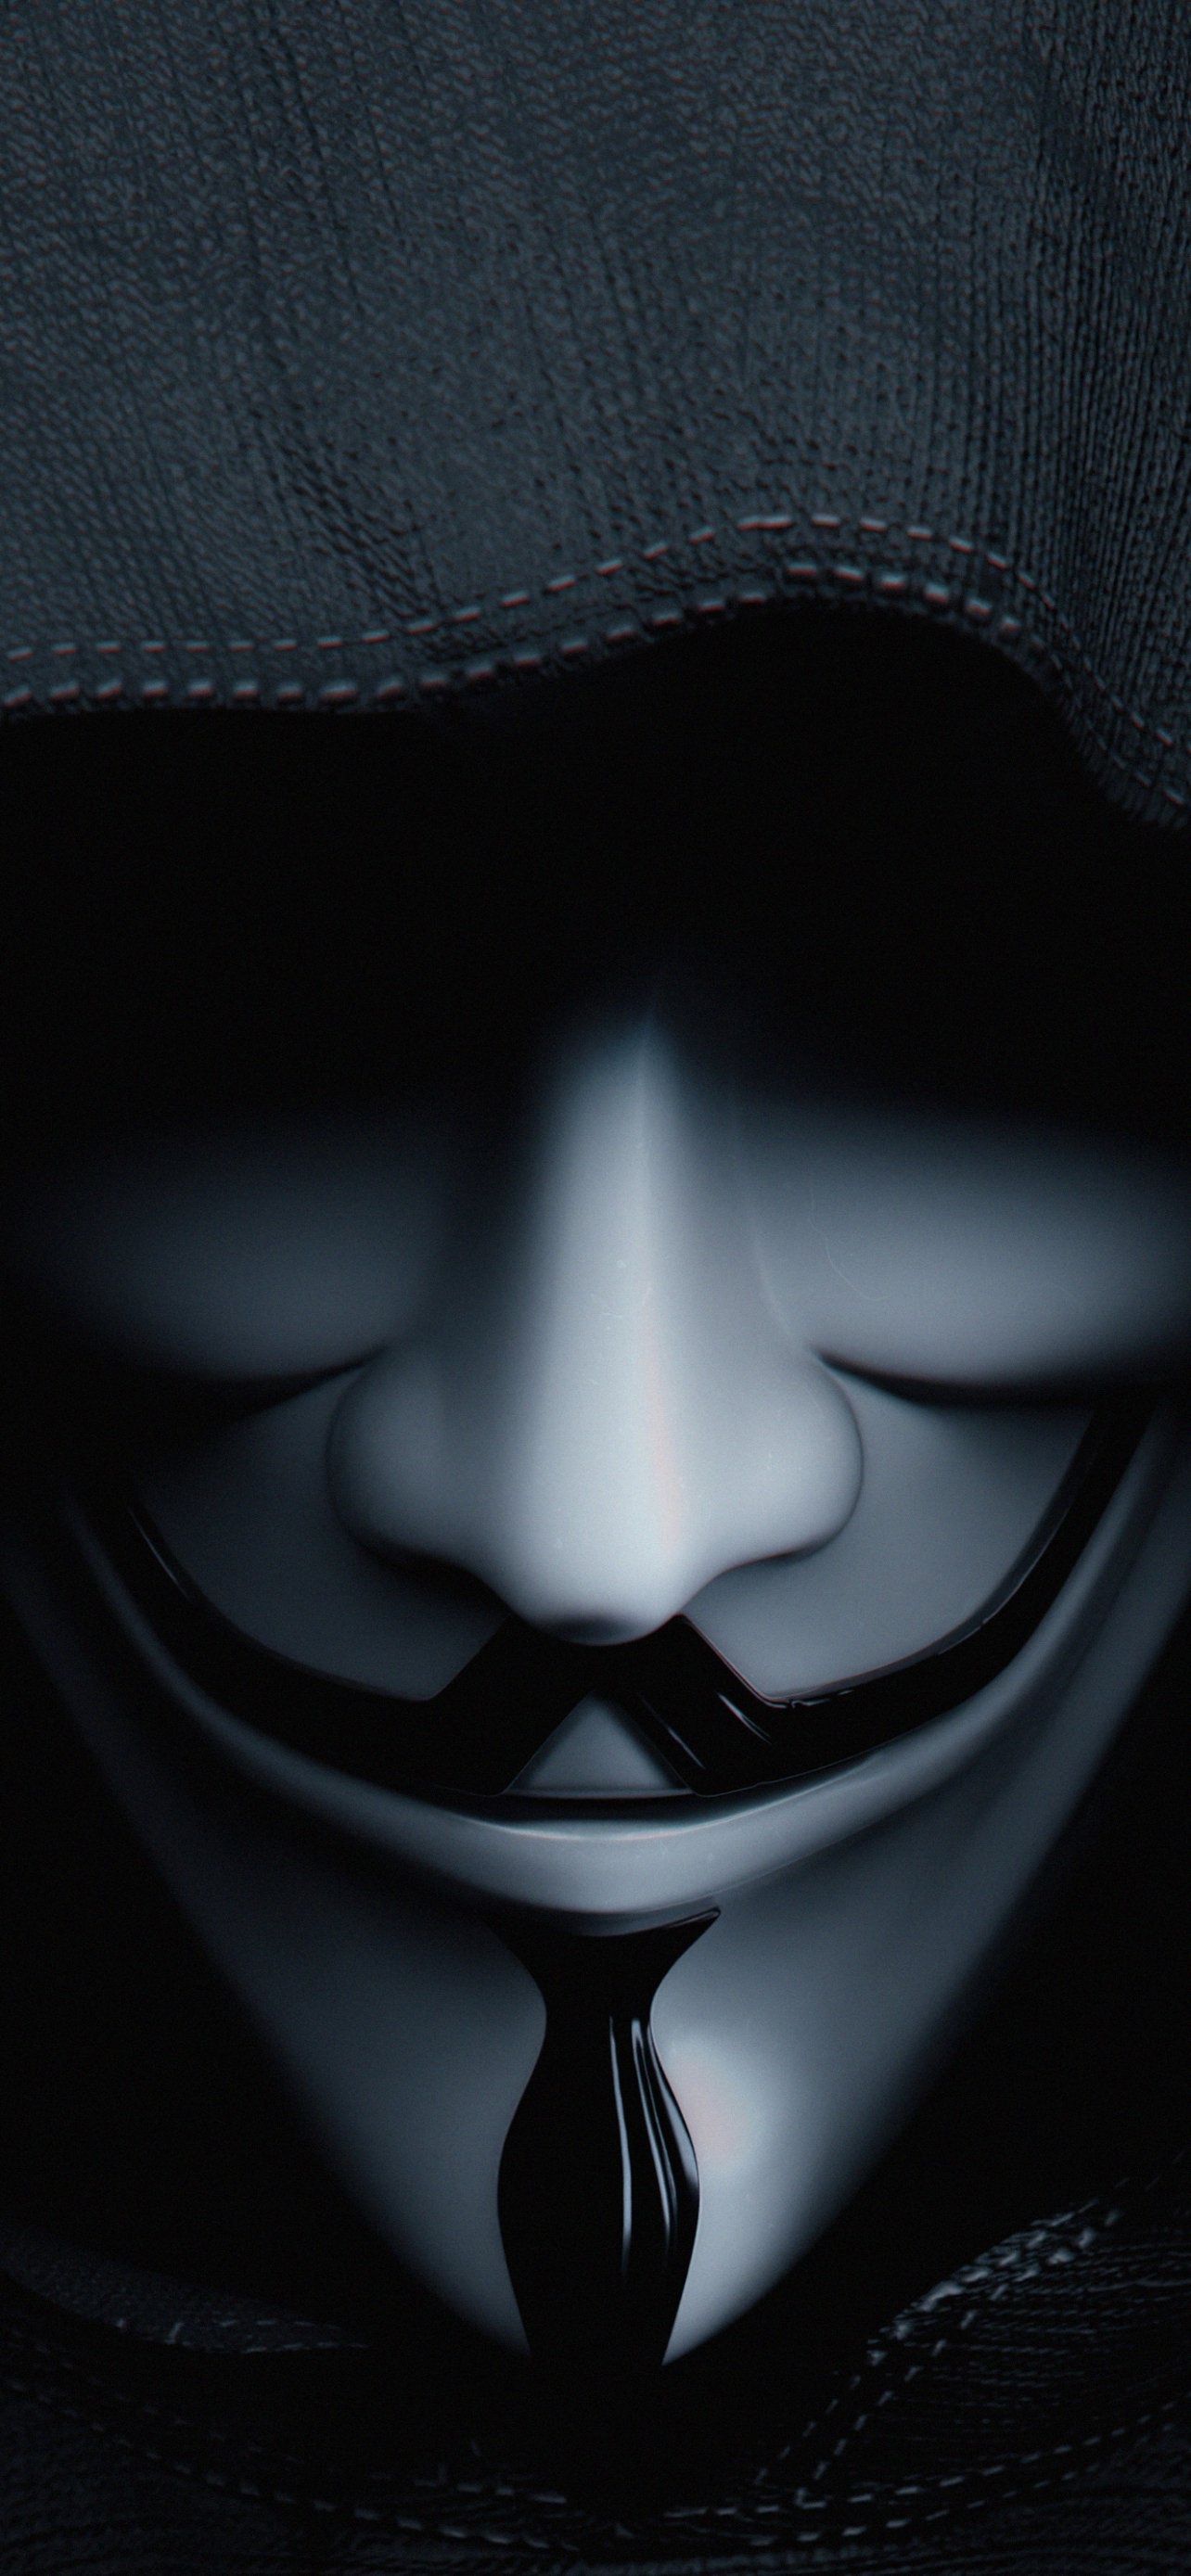 V for Vendetta: Anonymous mask, A stylized depiction of Guy Fawkes. 1290x2780 HD Wallpaper.